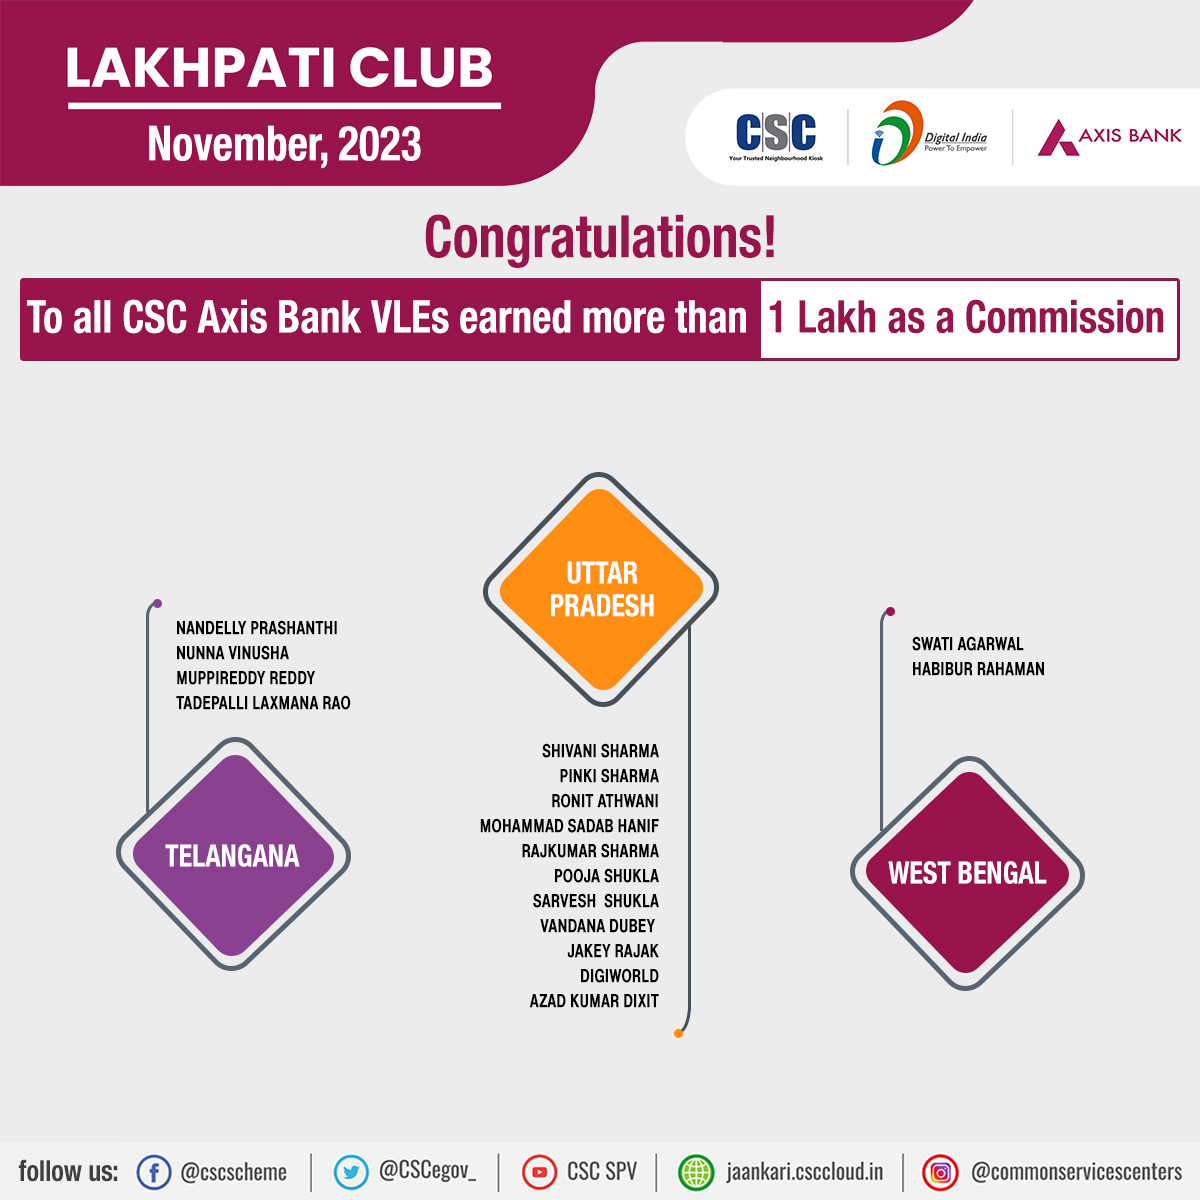 CSC Axis Bank LAKHPATI CLUB 114 VLEs LIST- 1 Nov'23! Congratulations🎉 to all CSC Axis Bank VLEs who have earned more than 1 Lakh commission. Wish you all the best in your future endeavours #cscfinancialservices #csc #digitalindia #axisbank #axisbanklakhpaticlub